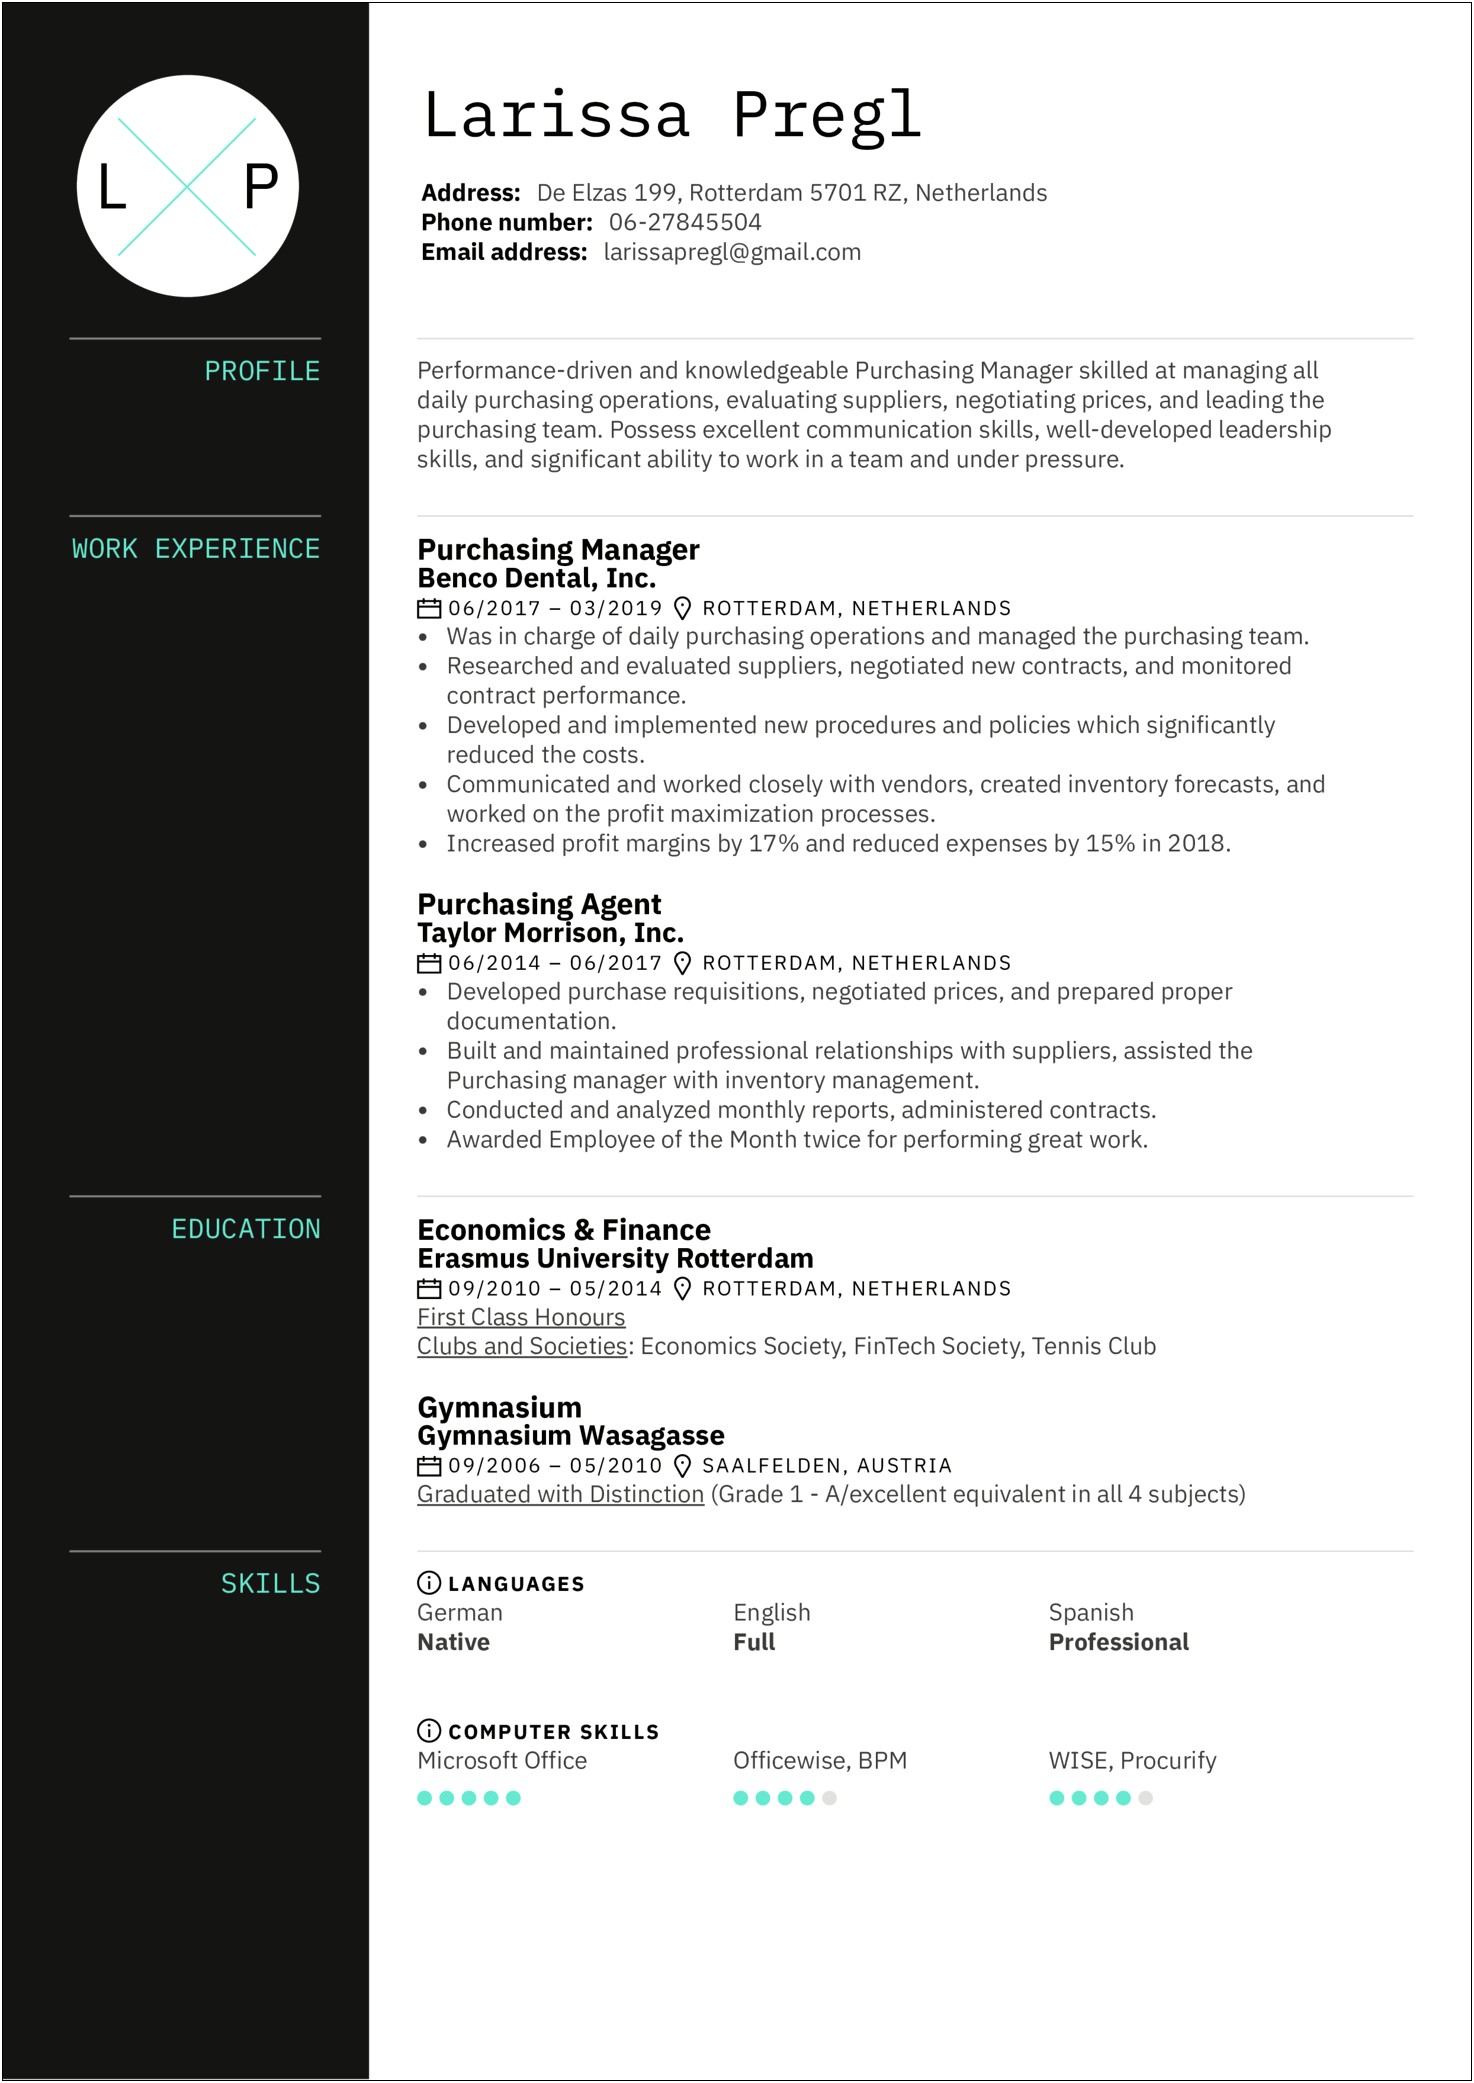 Examples Of Purchasing Manager Resumes